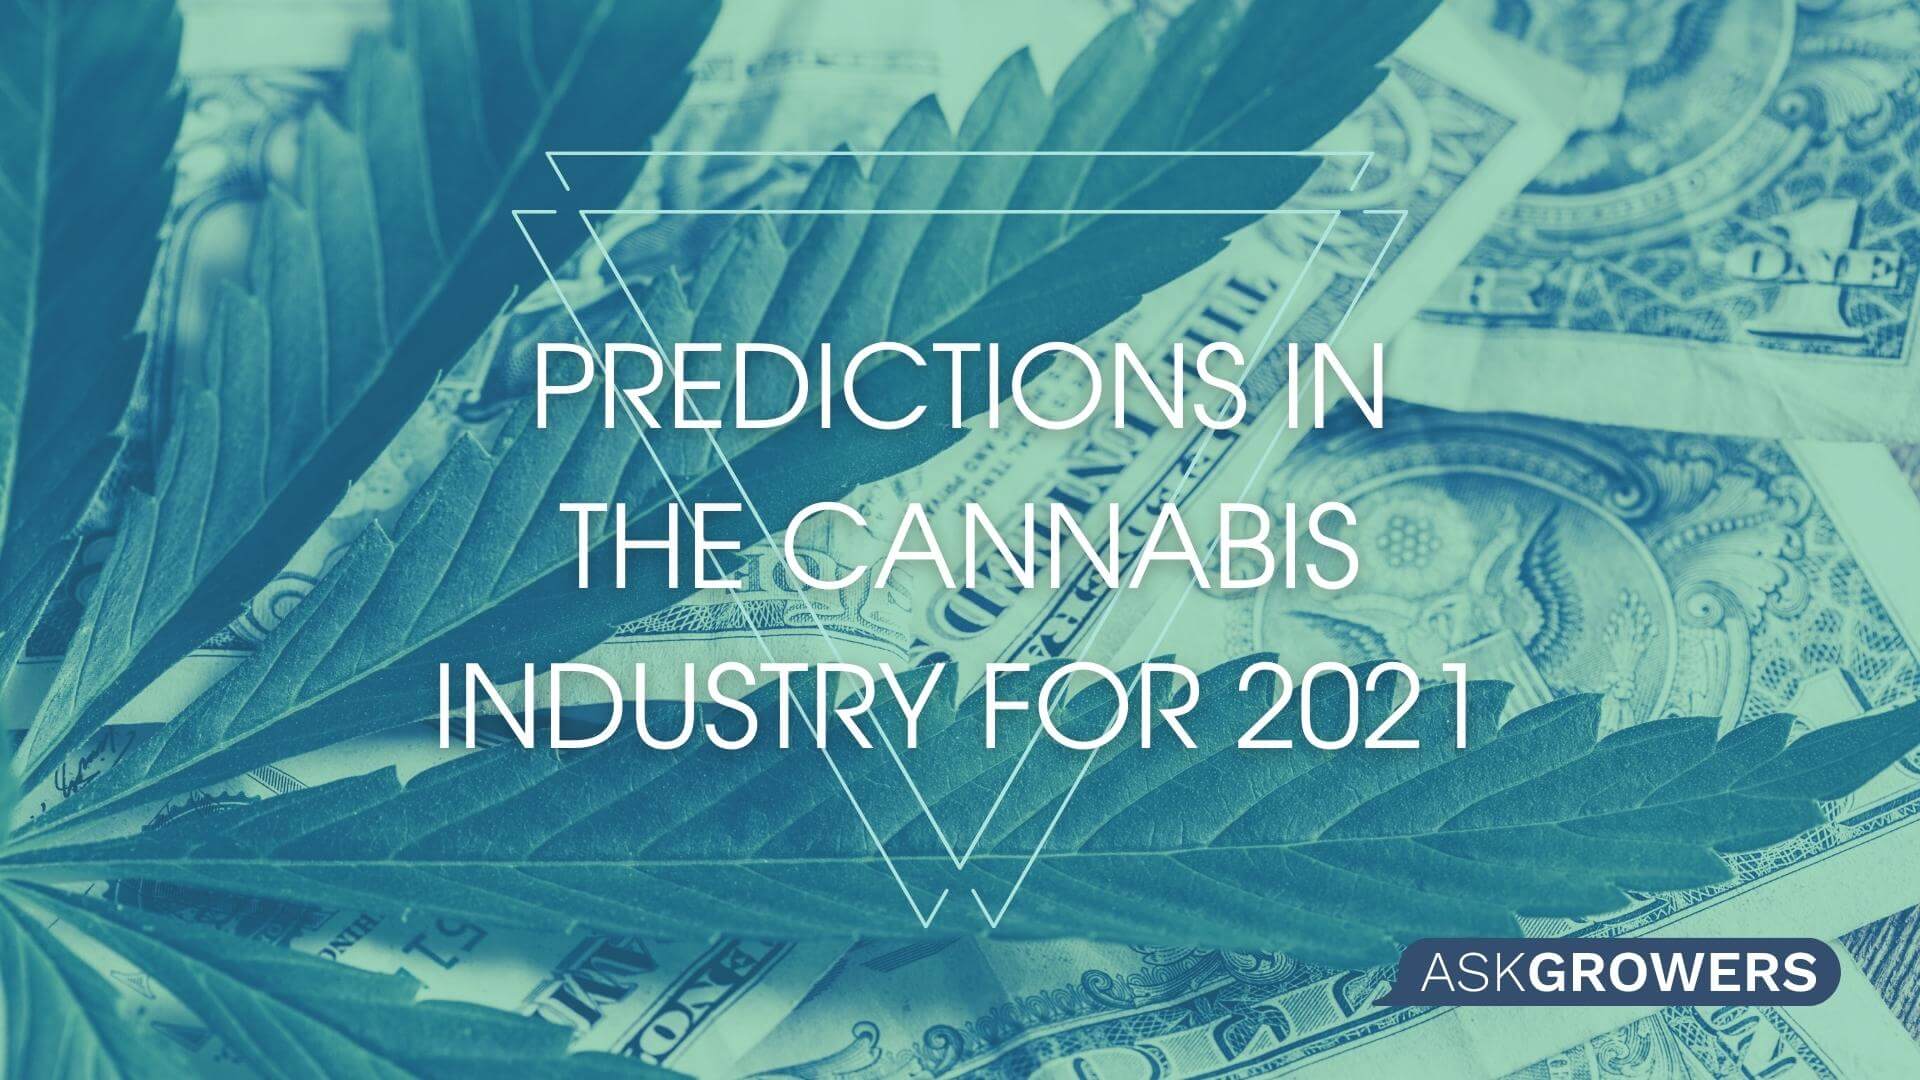 21 Predictions in the Cannabis Industry for 2021